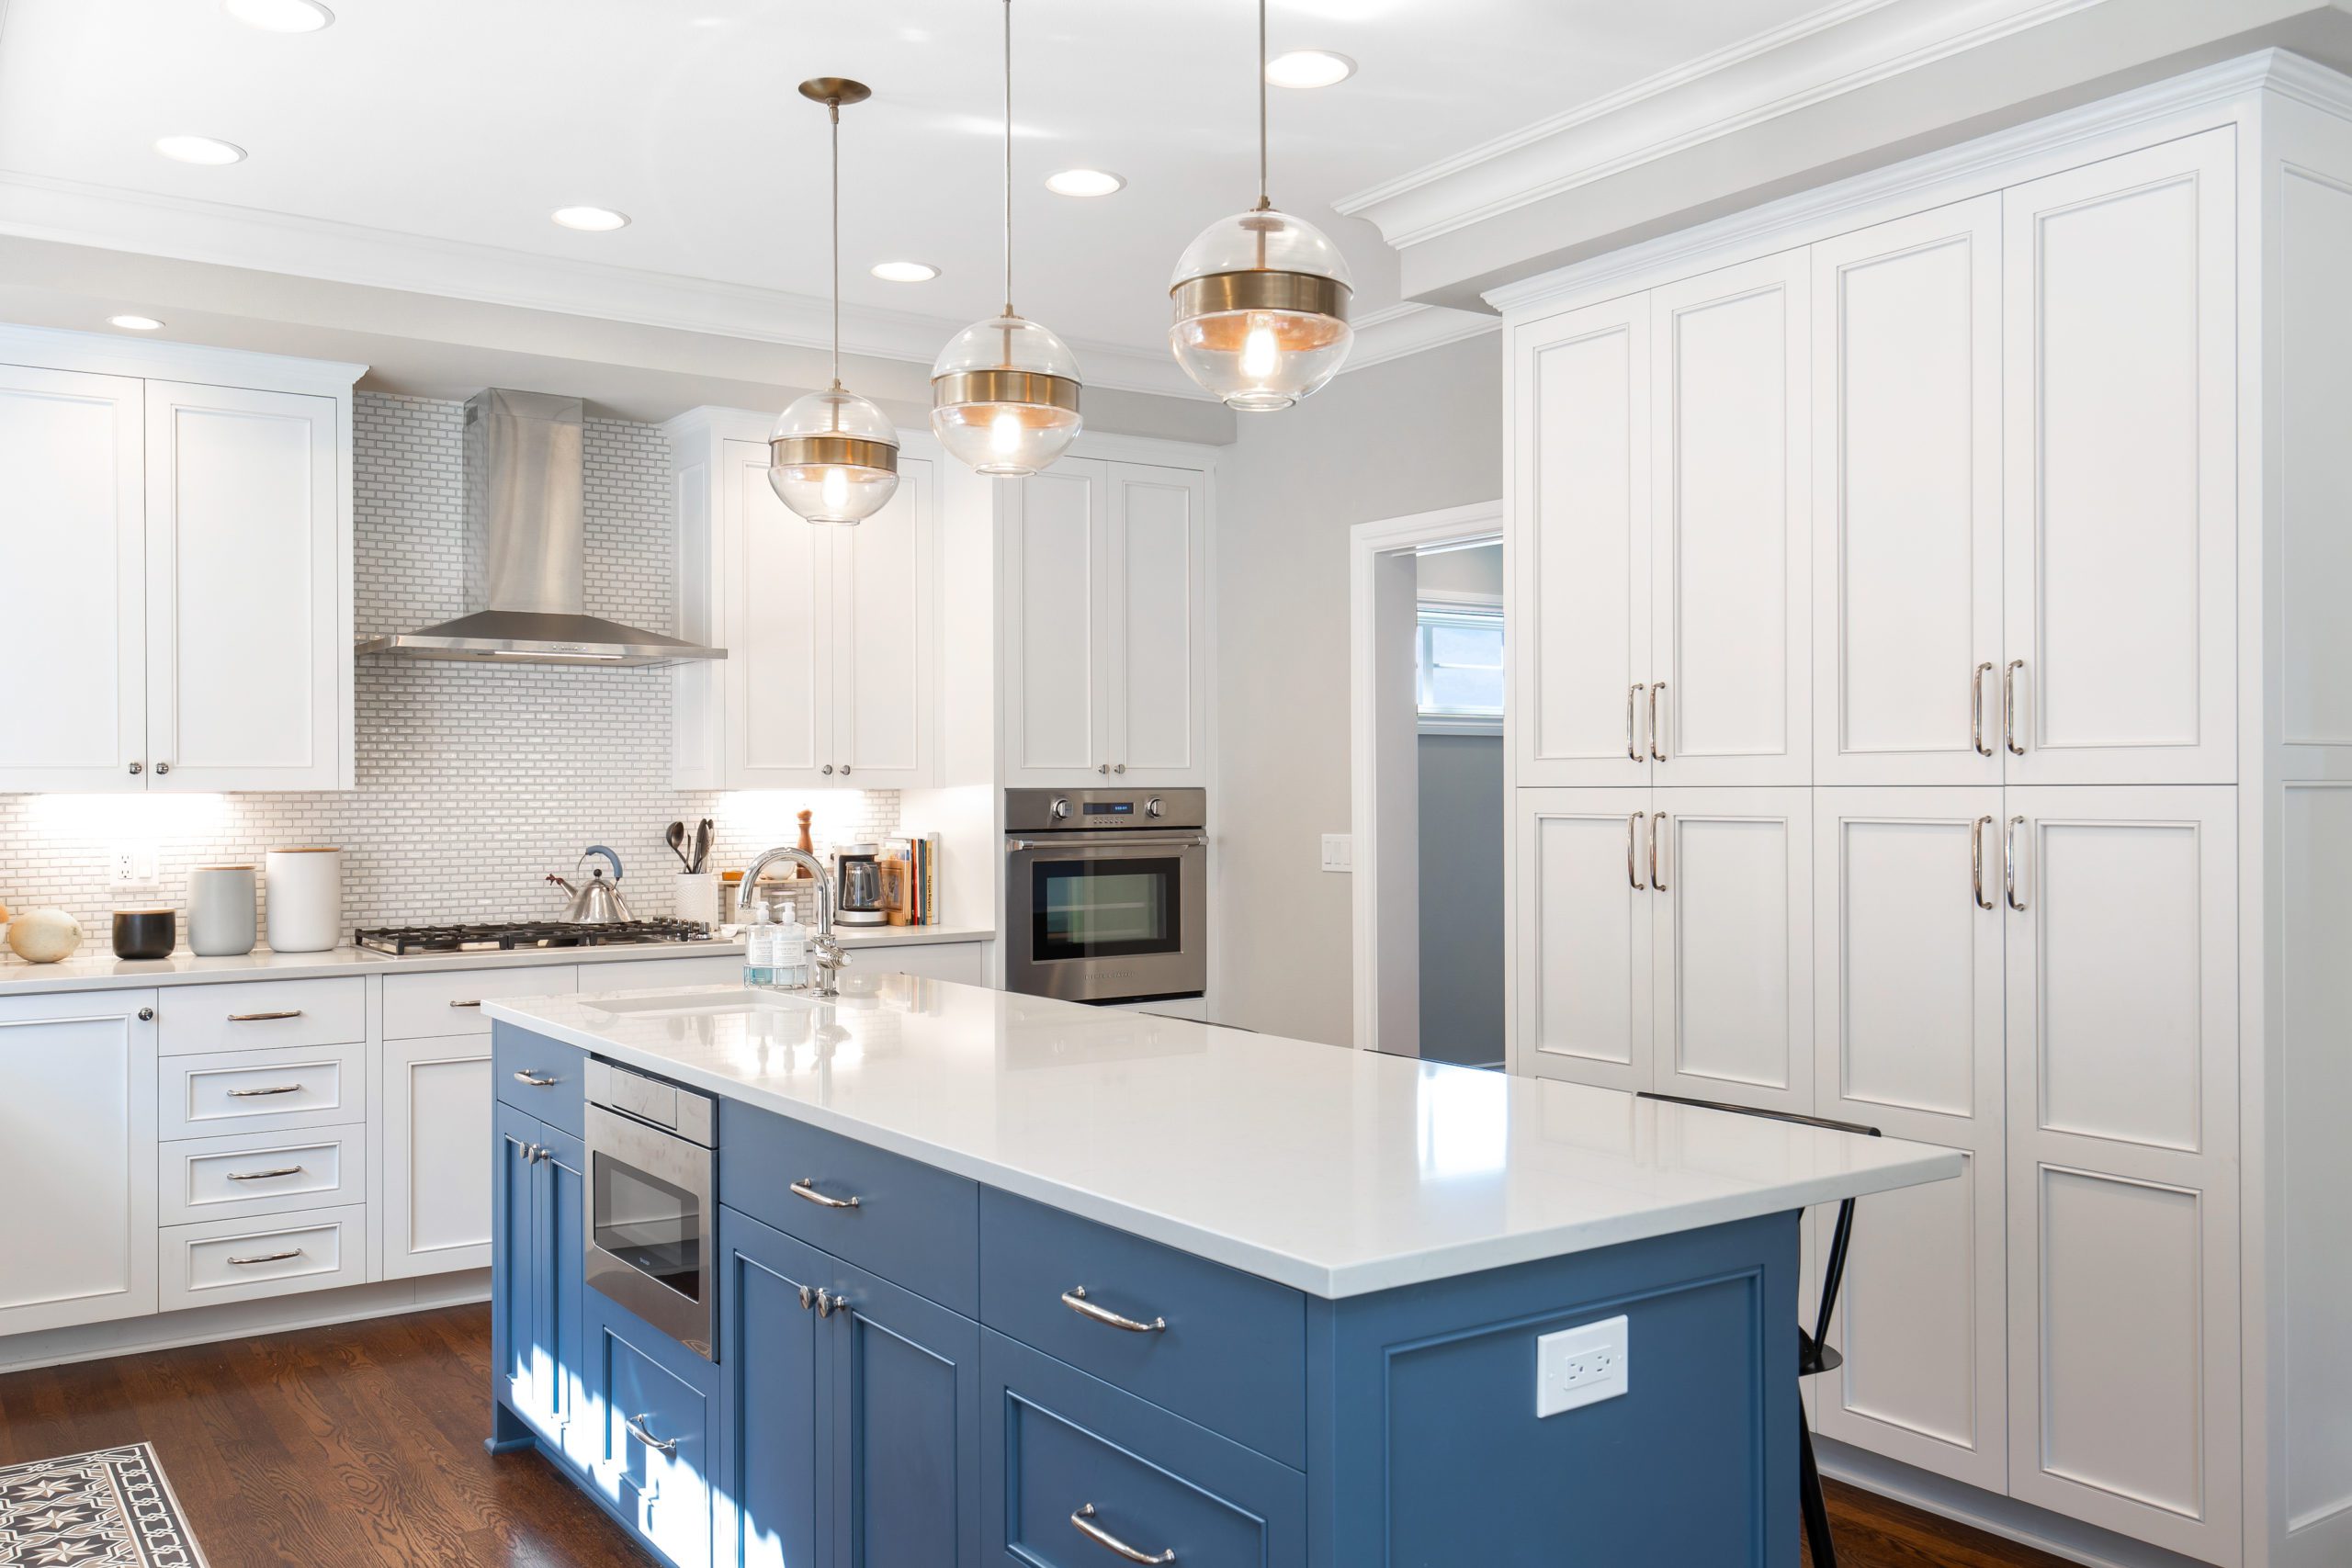 White kitchen with middle island and blue base